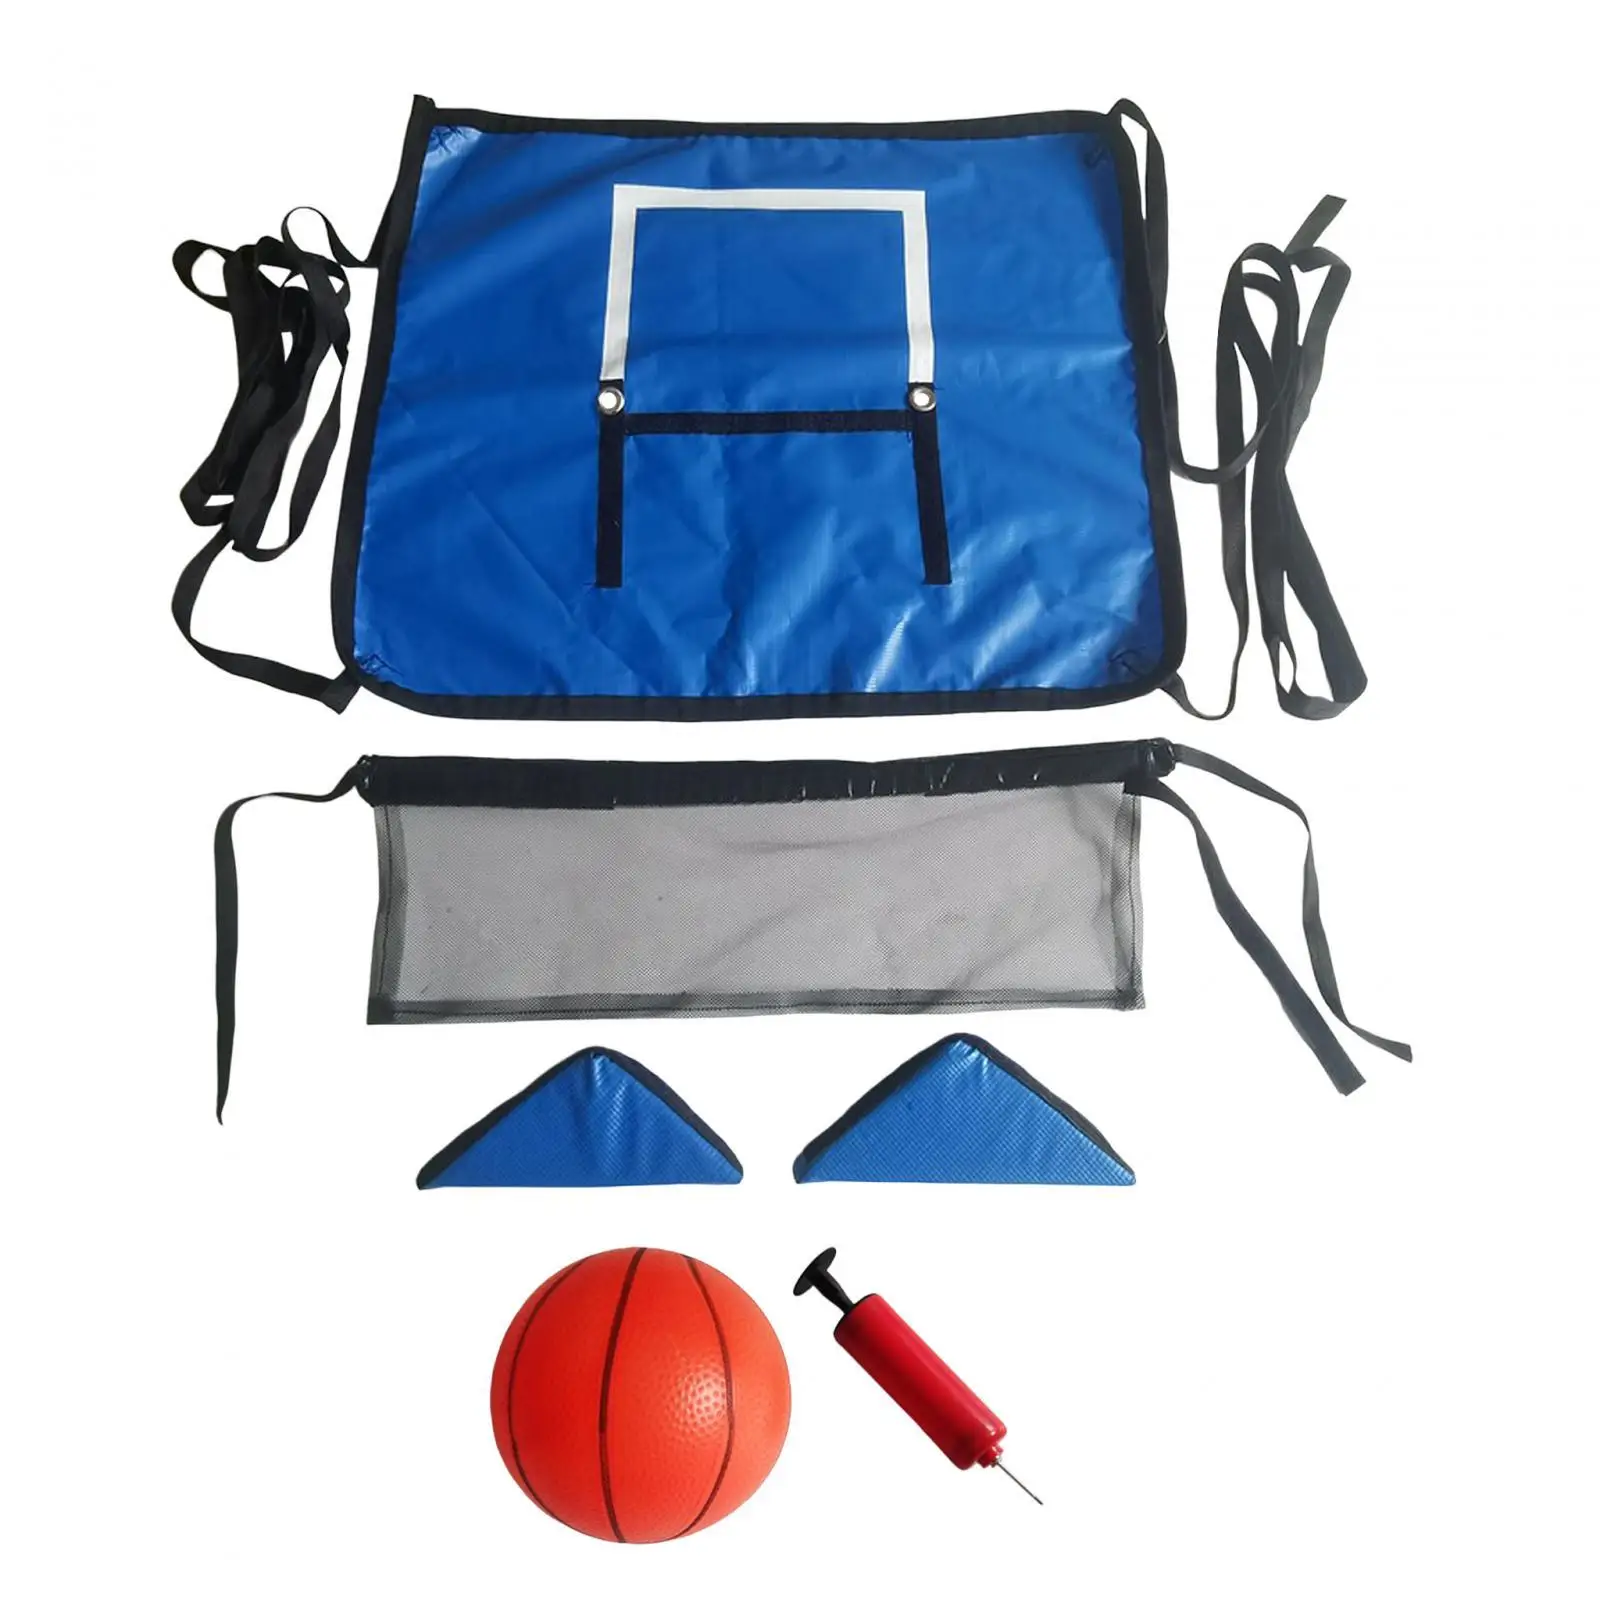 Trampoline Basketball Hoop for Outdoor including Small Basketball Easy to Install Durable for Kids Adults Garden Basketball Goal